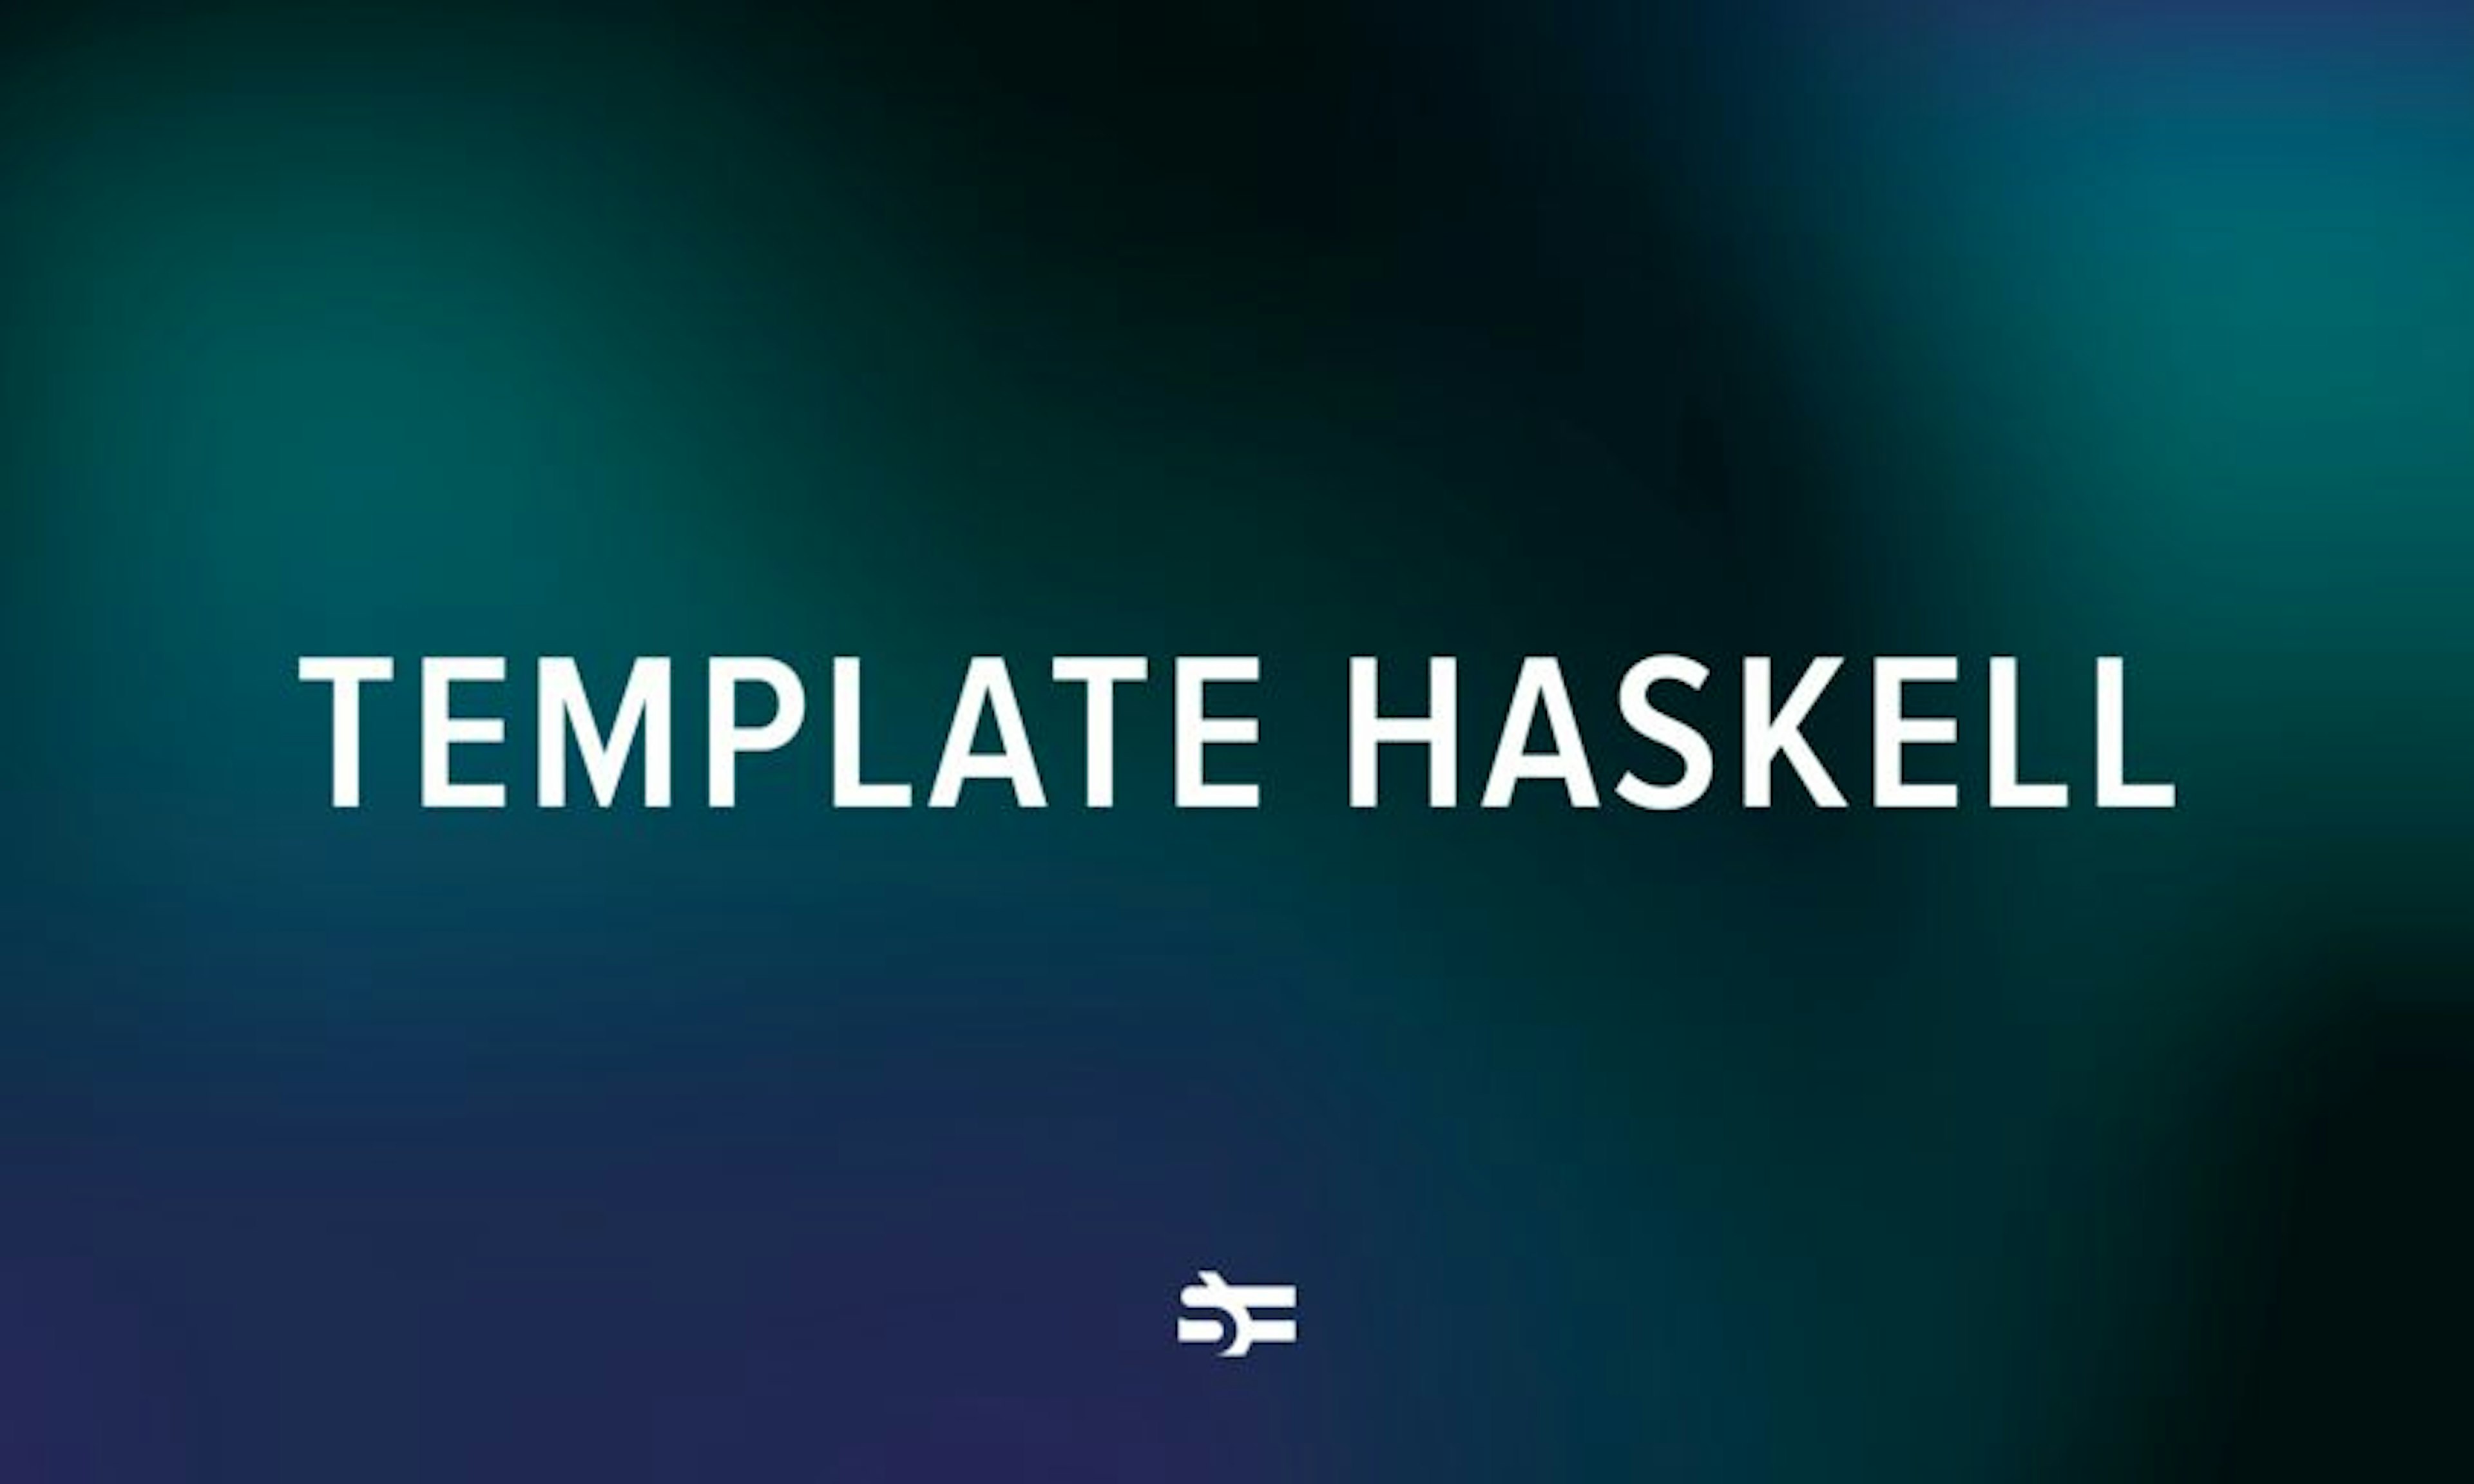 A Brief Introduction to Template Haskell